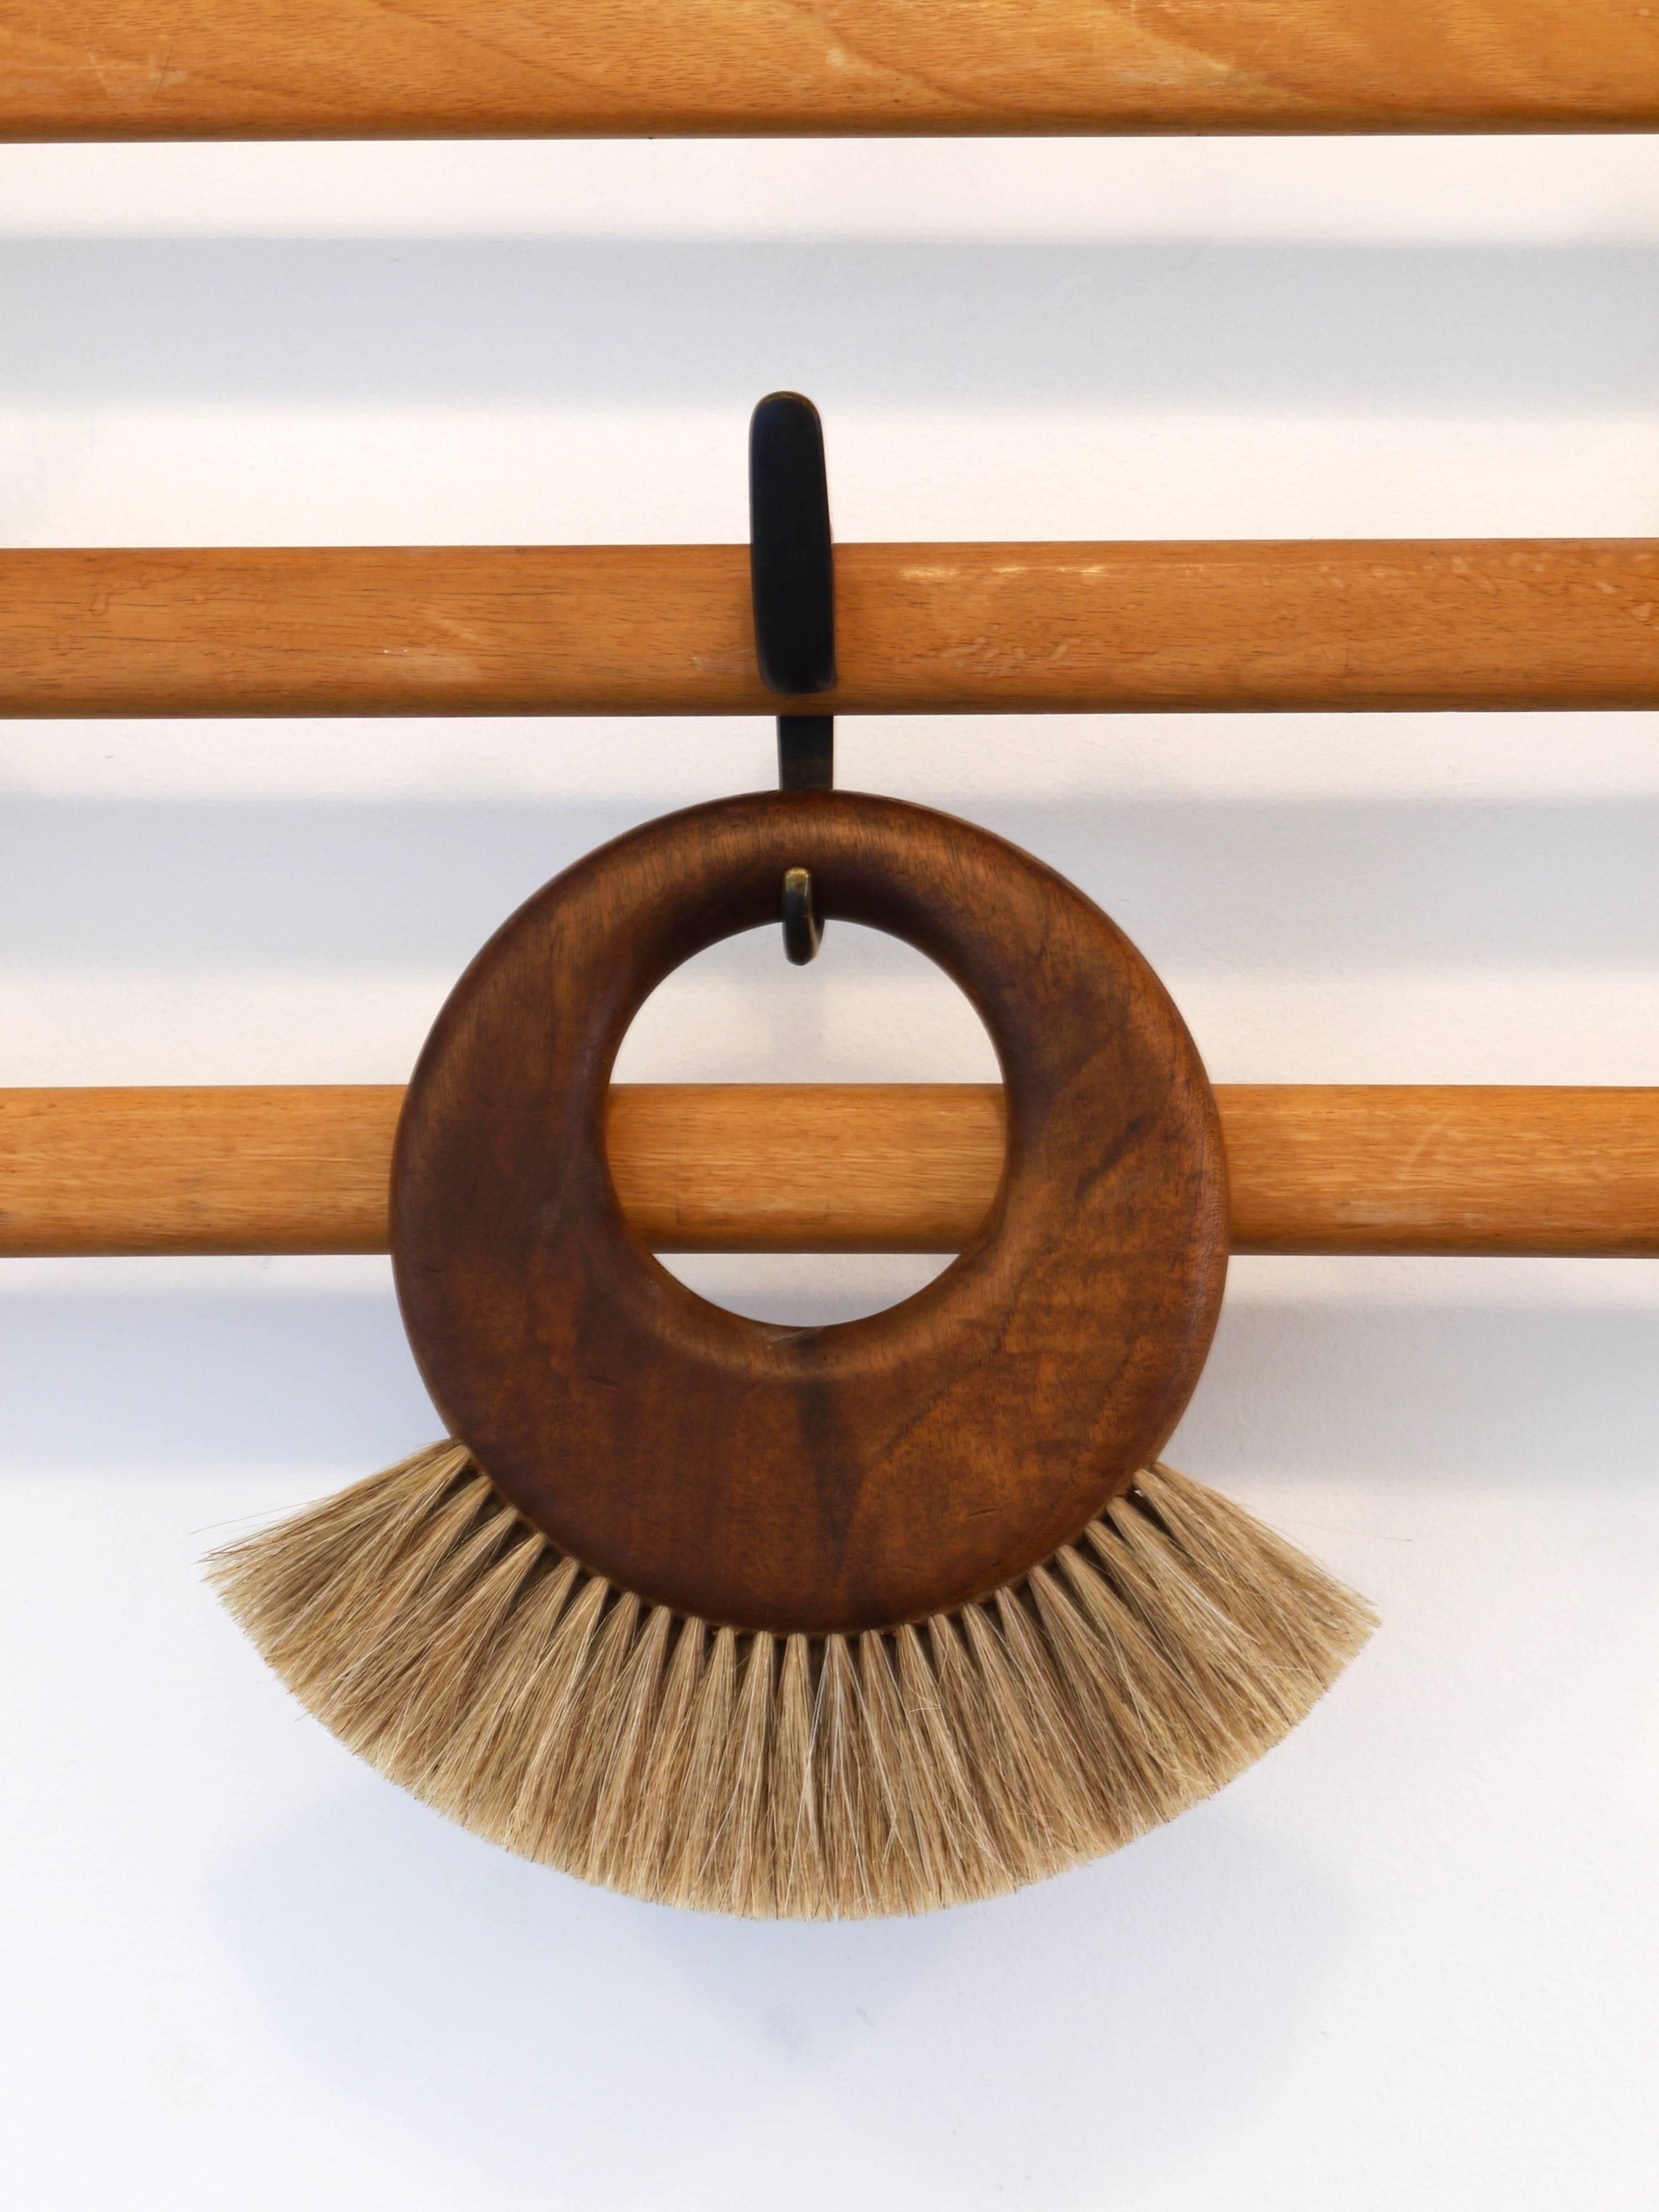 A beautiful ring-shaped modernist wall-hung clothes brush from the 1950s. Designed and executed by Carl Aubock, Vienna, in the 1950s. Made of walnut and natural bristles. In very good condition with nice patina.